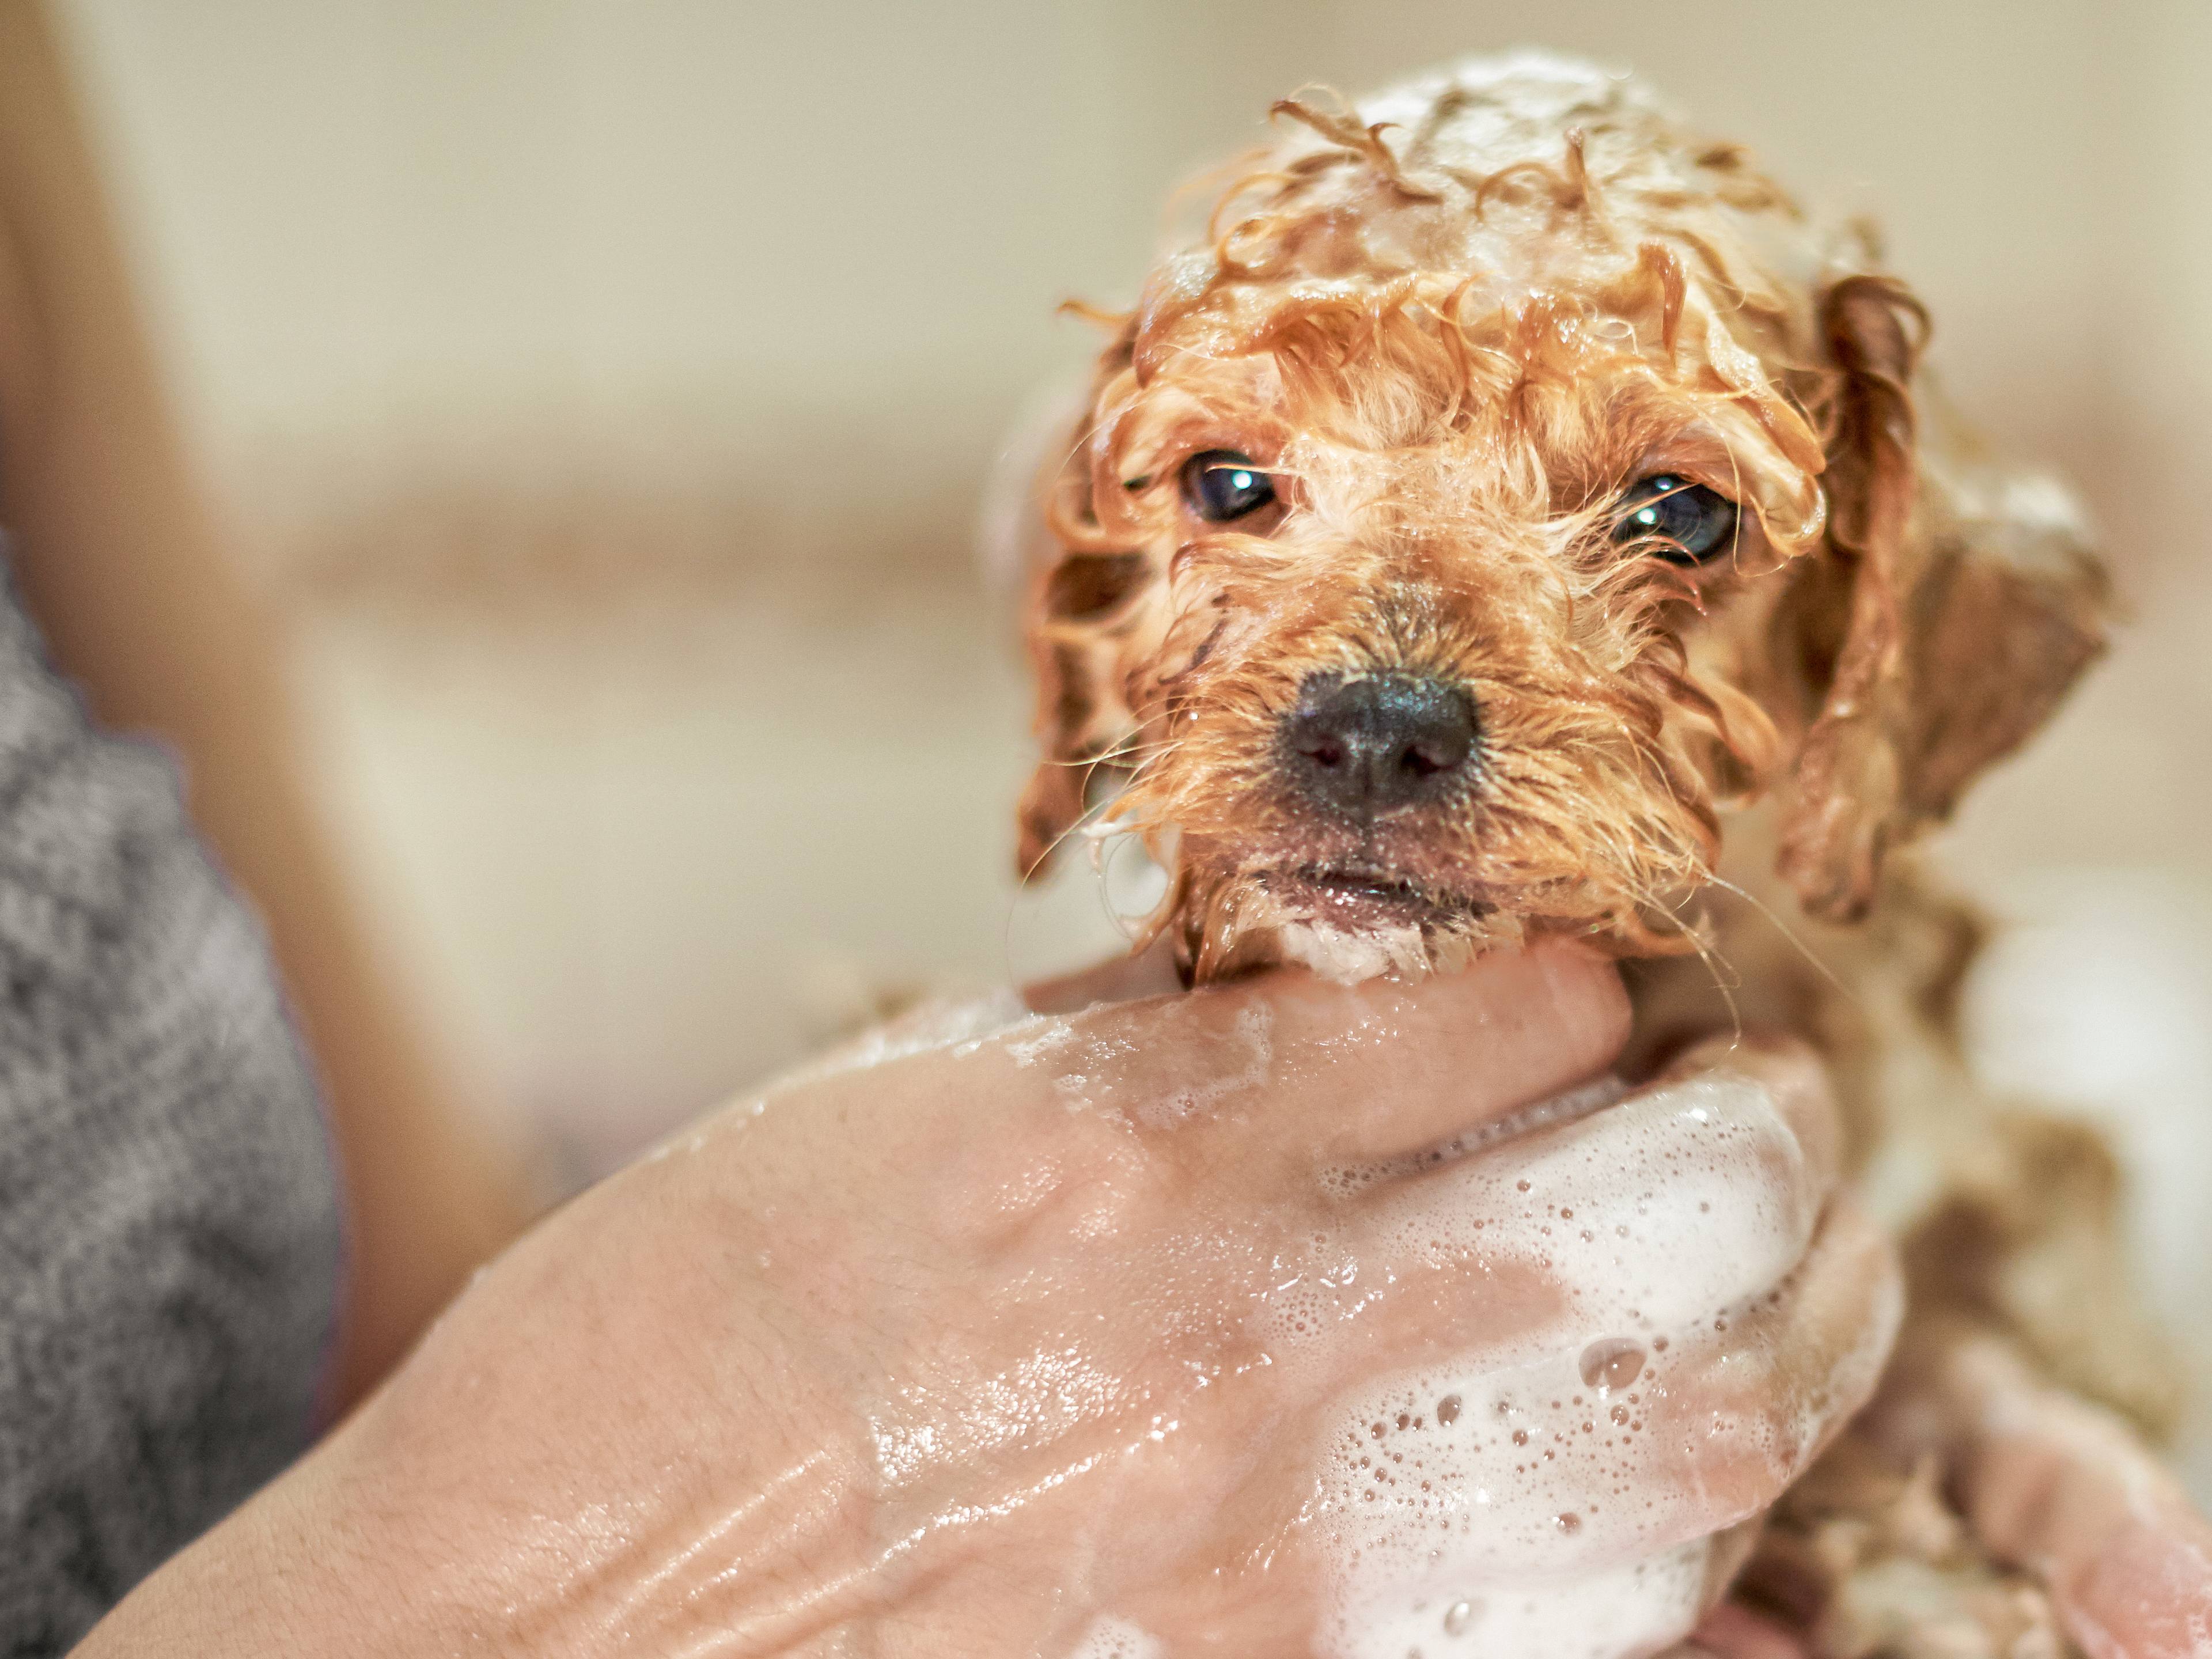 Miniature Poodle puppy being washed by owner